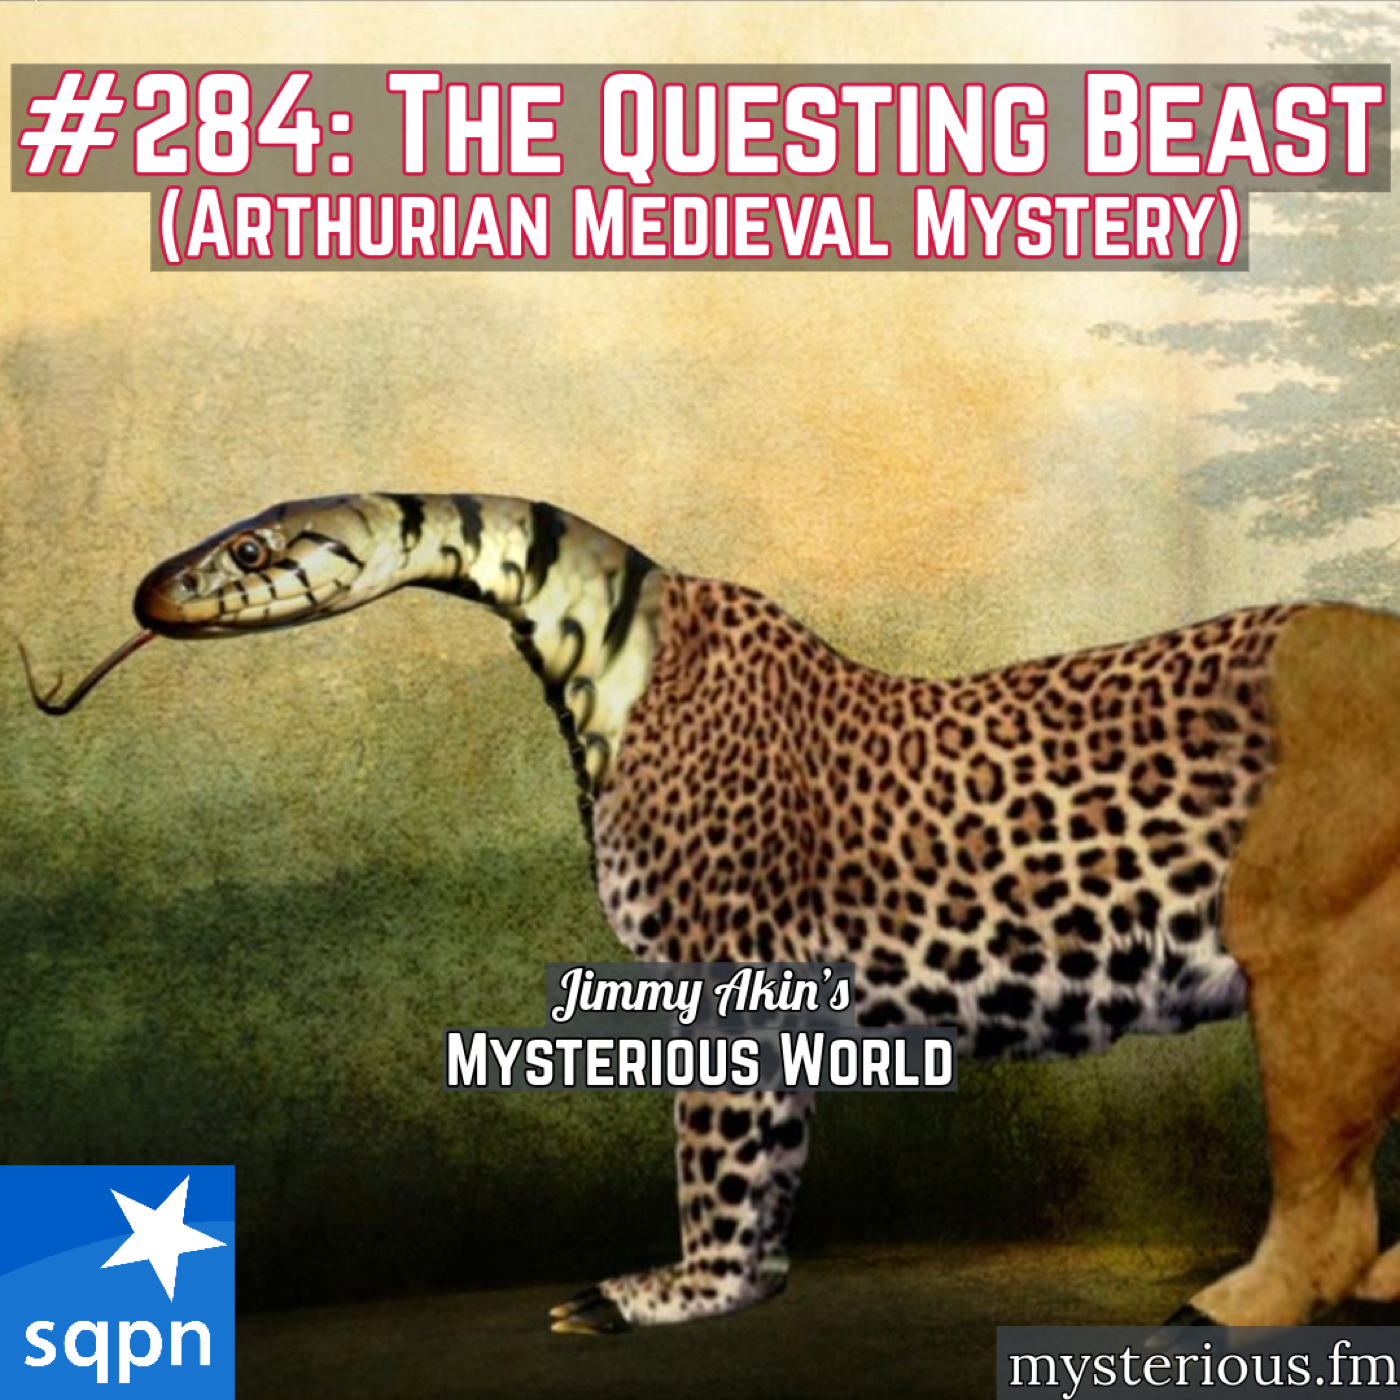 The Questing Beast (King Arthur, Medieval Mystery)